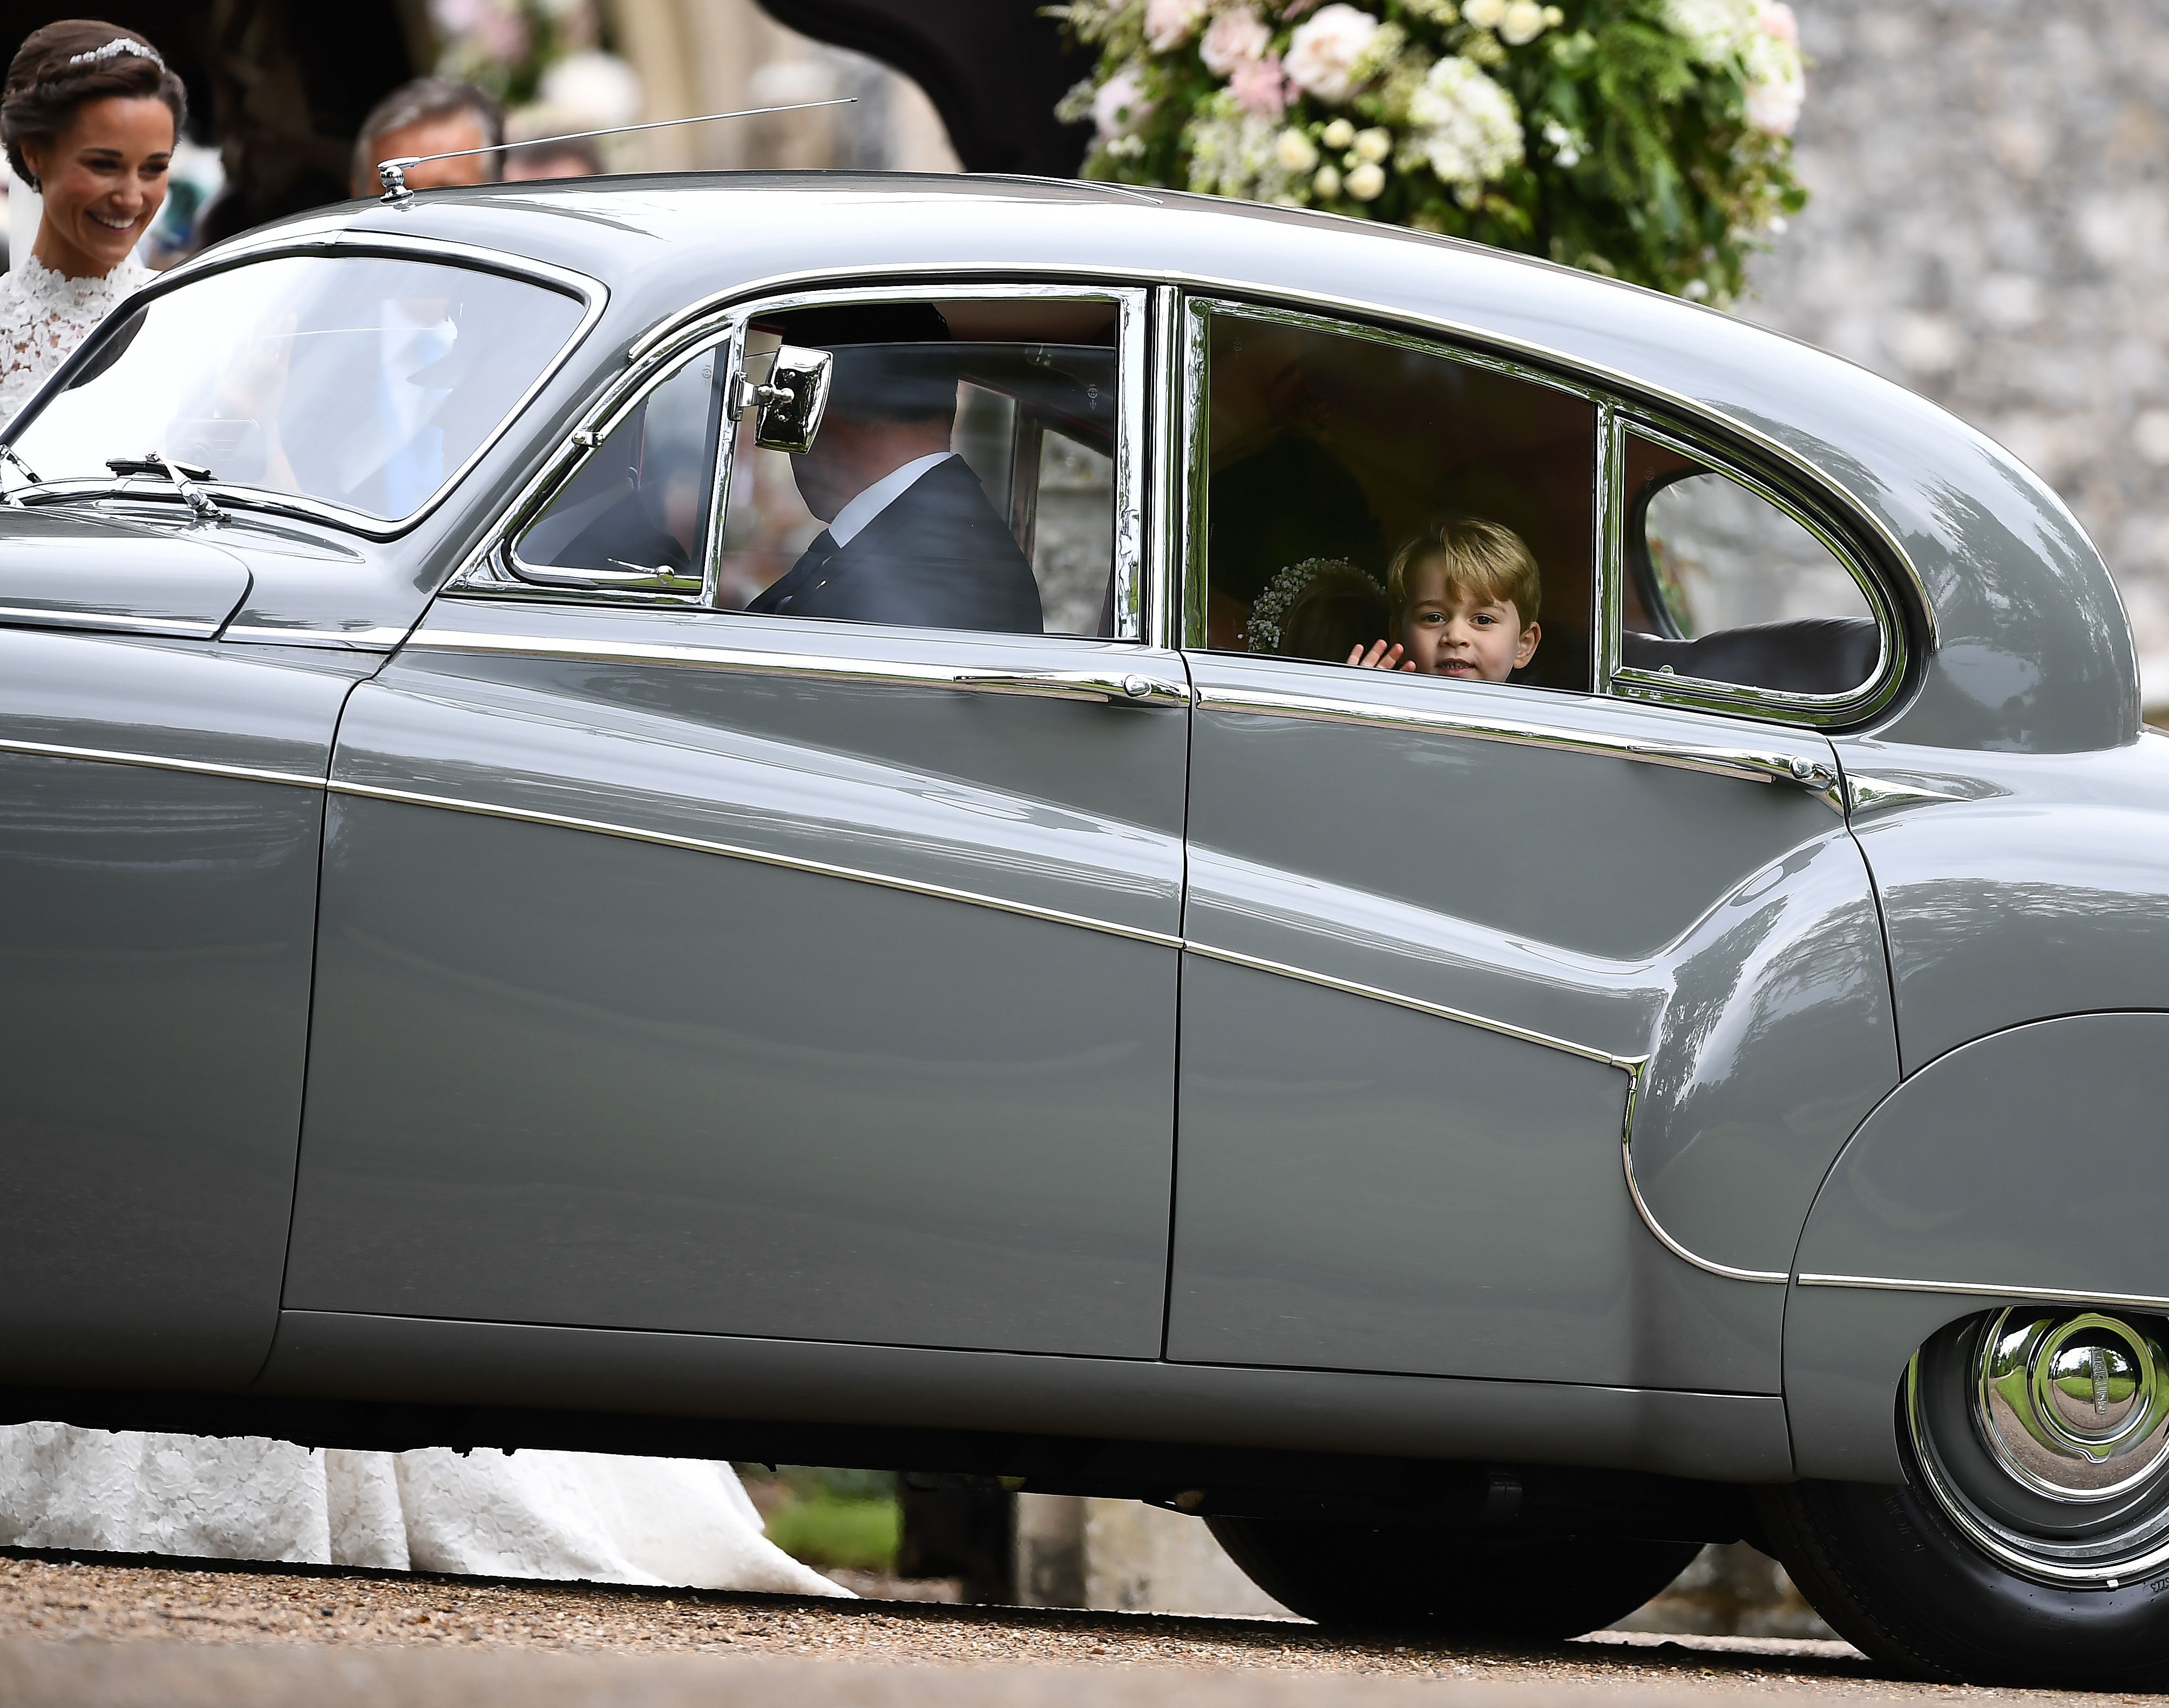 Britain's Prince George (R) waves as he leaves in a car after attending the wedding of his aunt, Pippa Middleton (L), to James Matthews at St Mark's Church in Englefield, west of London, on May 20, 2017.TALLIS/AFP/Getty Images)